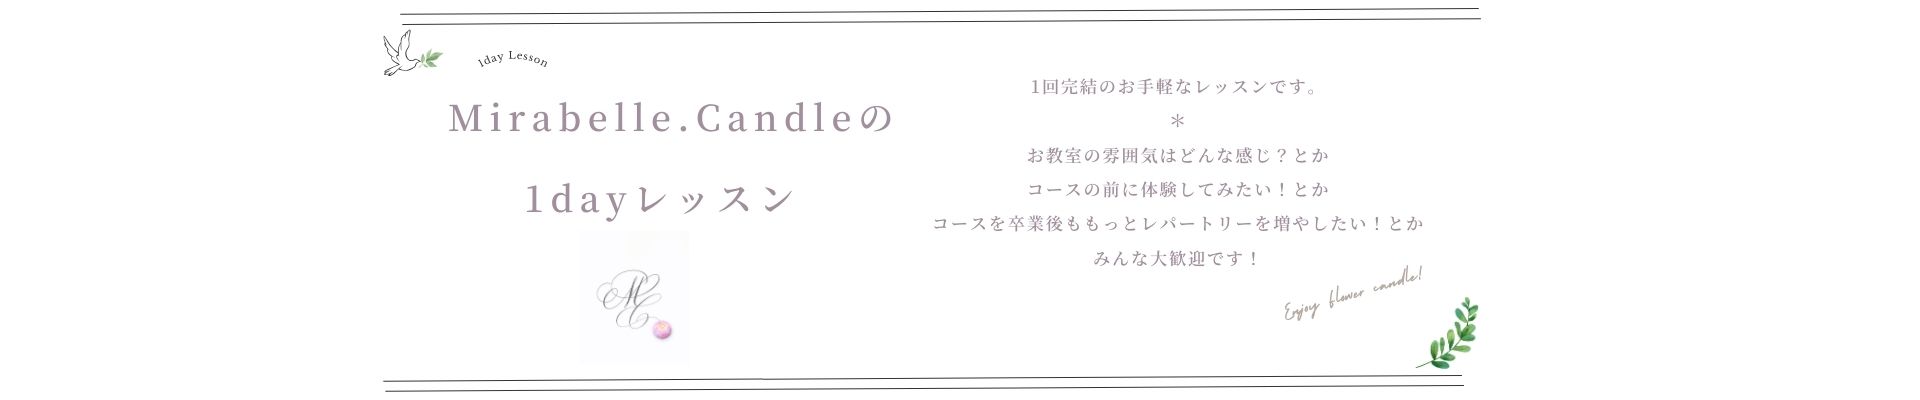 Mirabelle.Candleの1dayレッスン